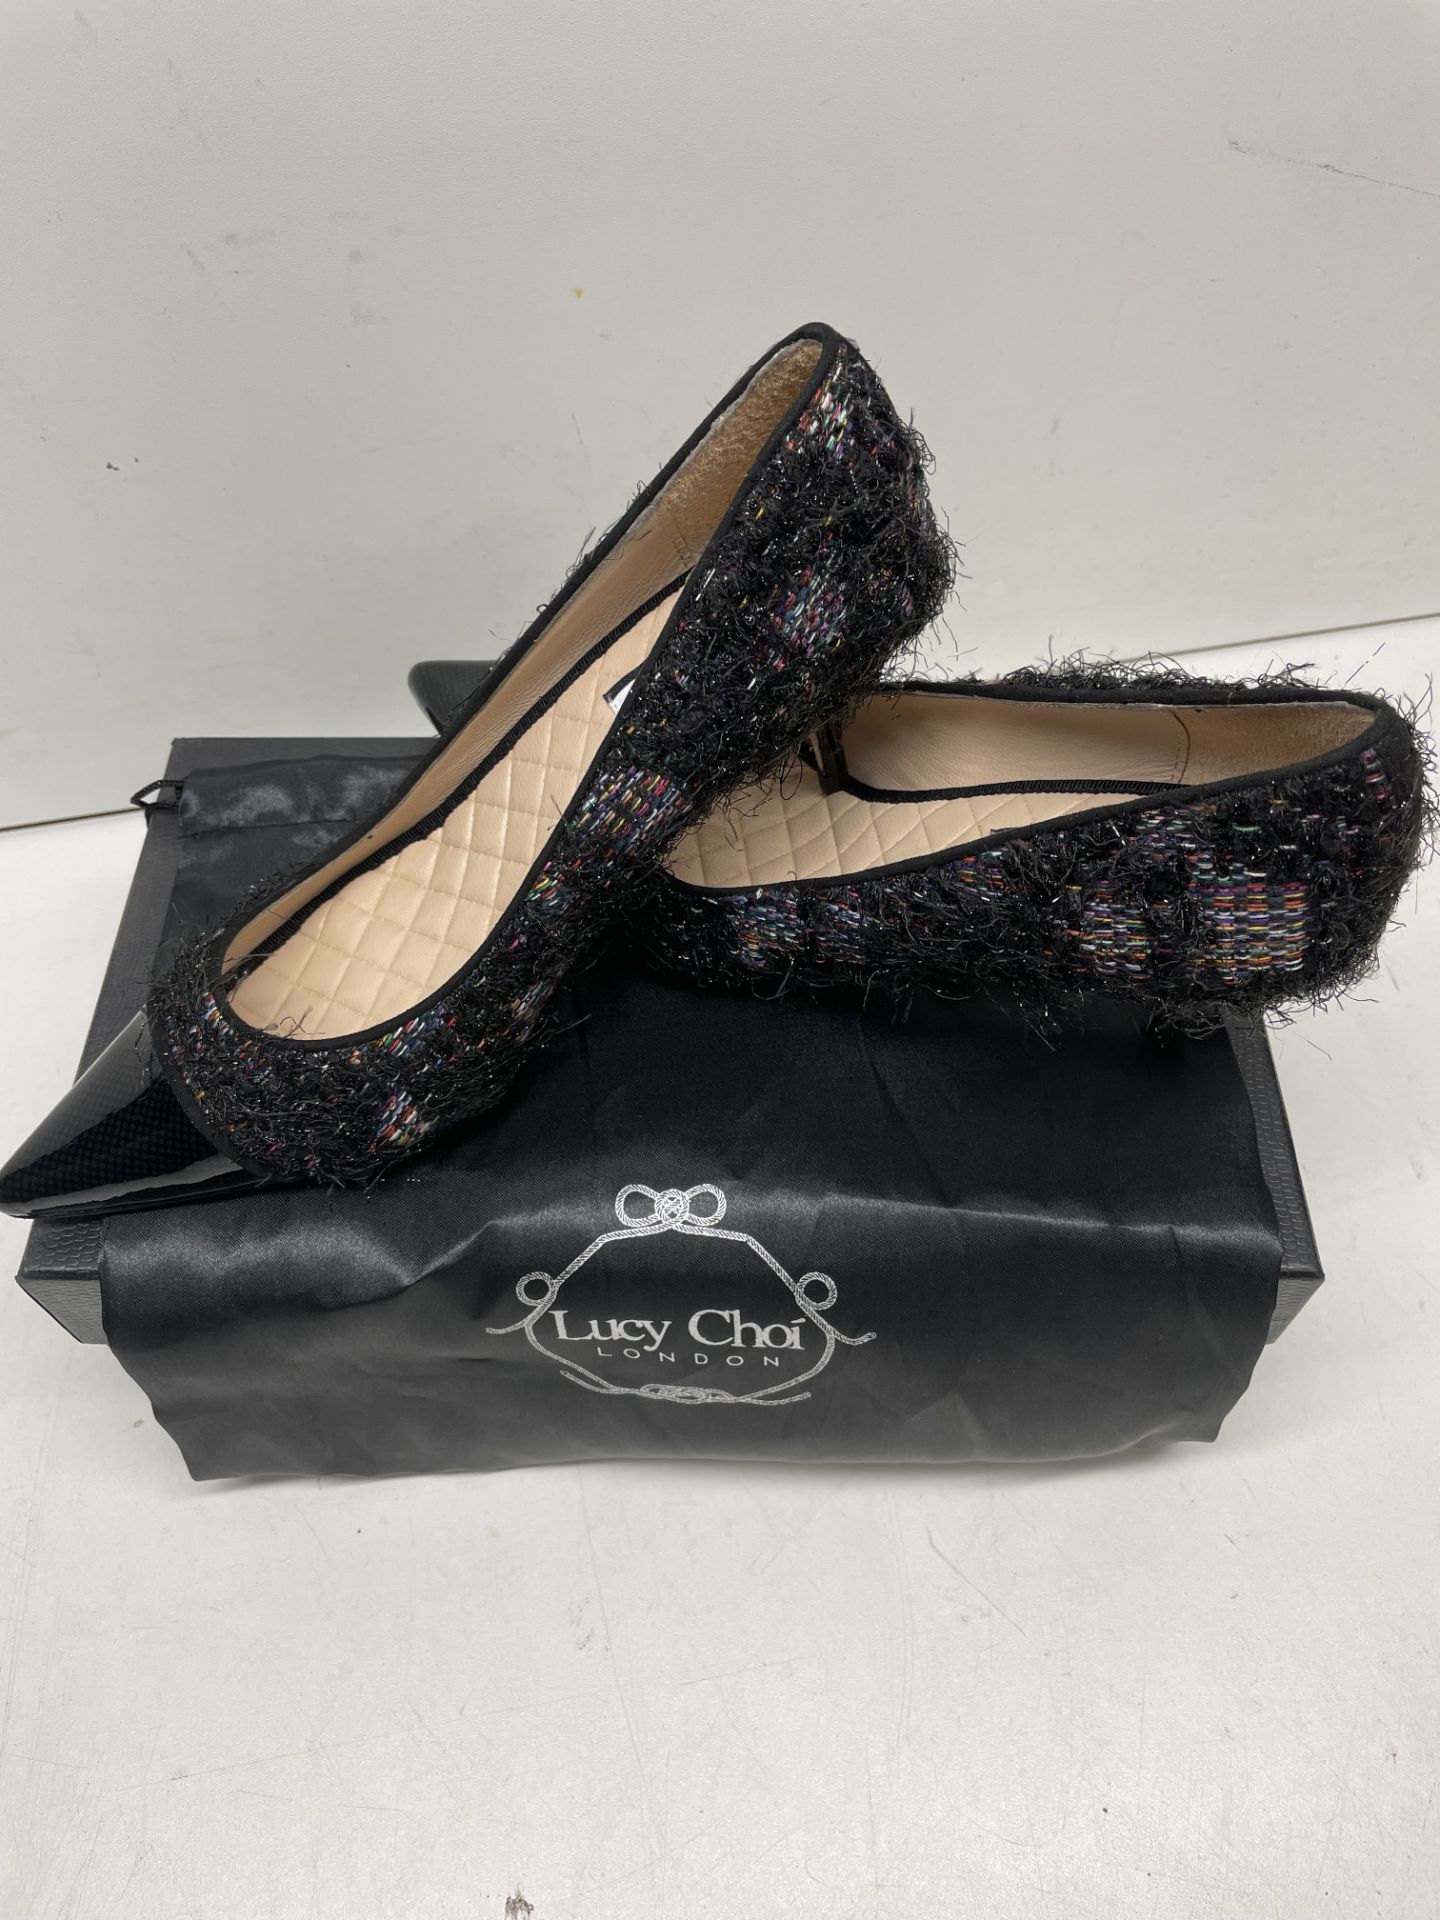 Ex-Display Lucy Choi Kitten Heel Shoes | Eur 36.5 - Image 2 of 4